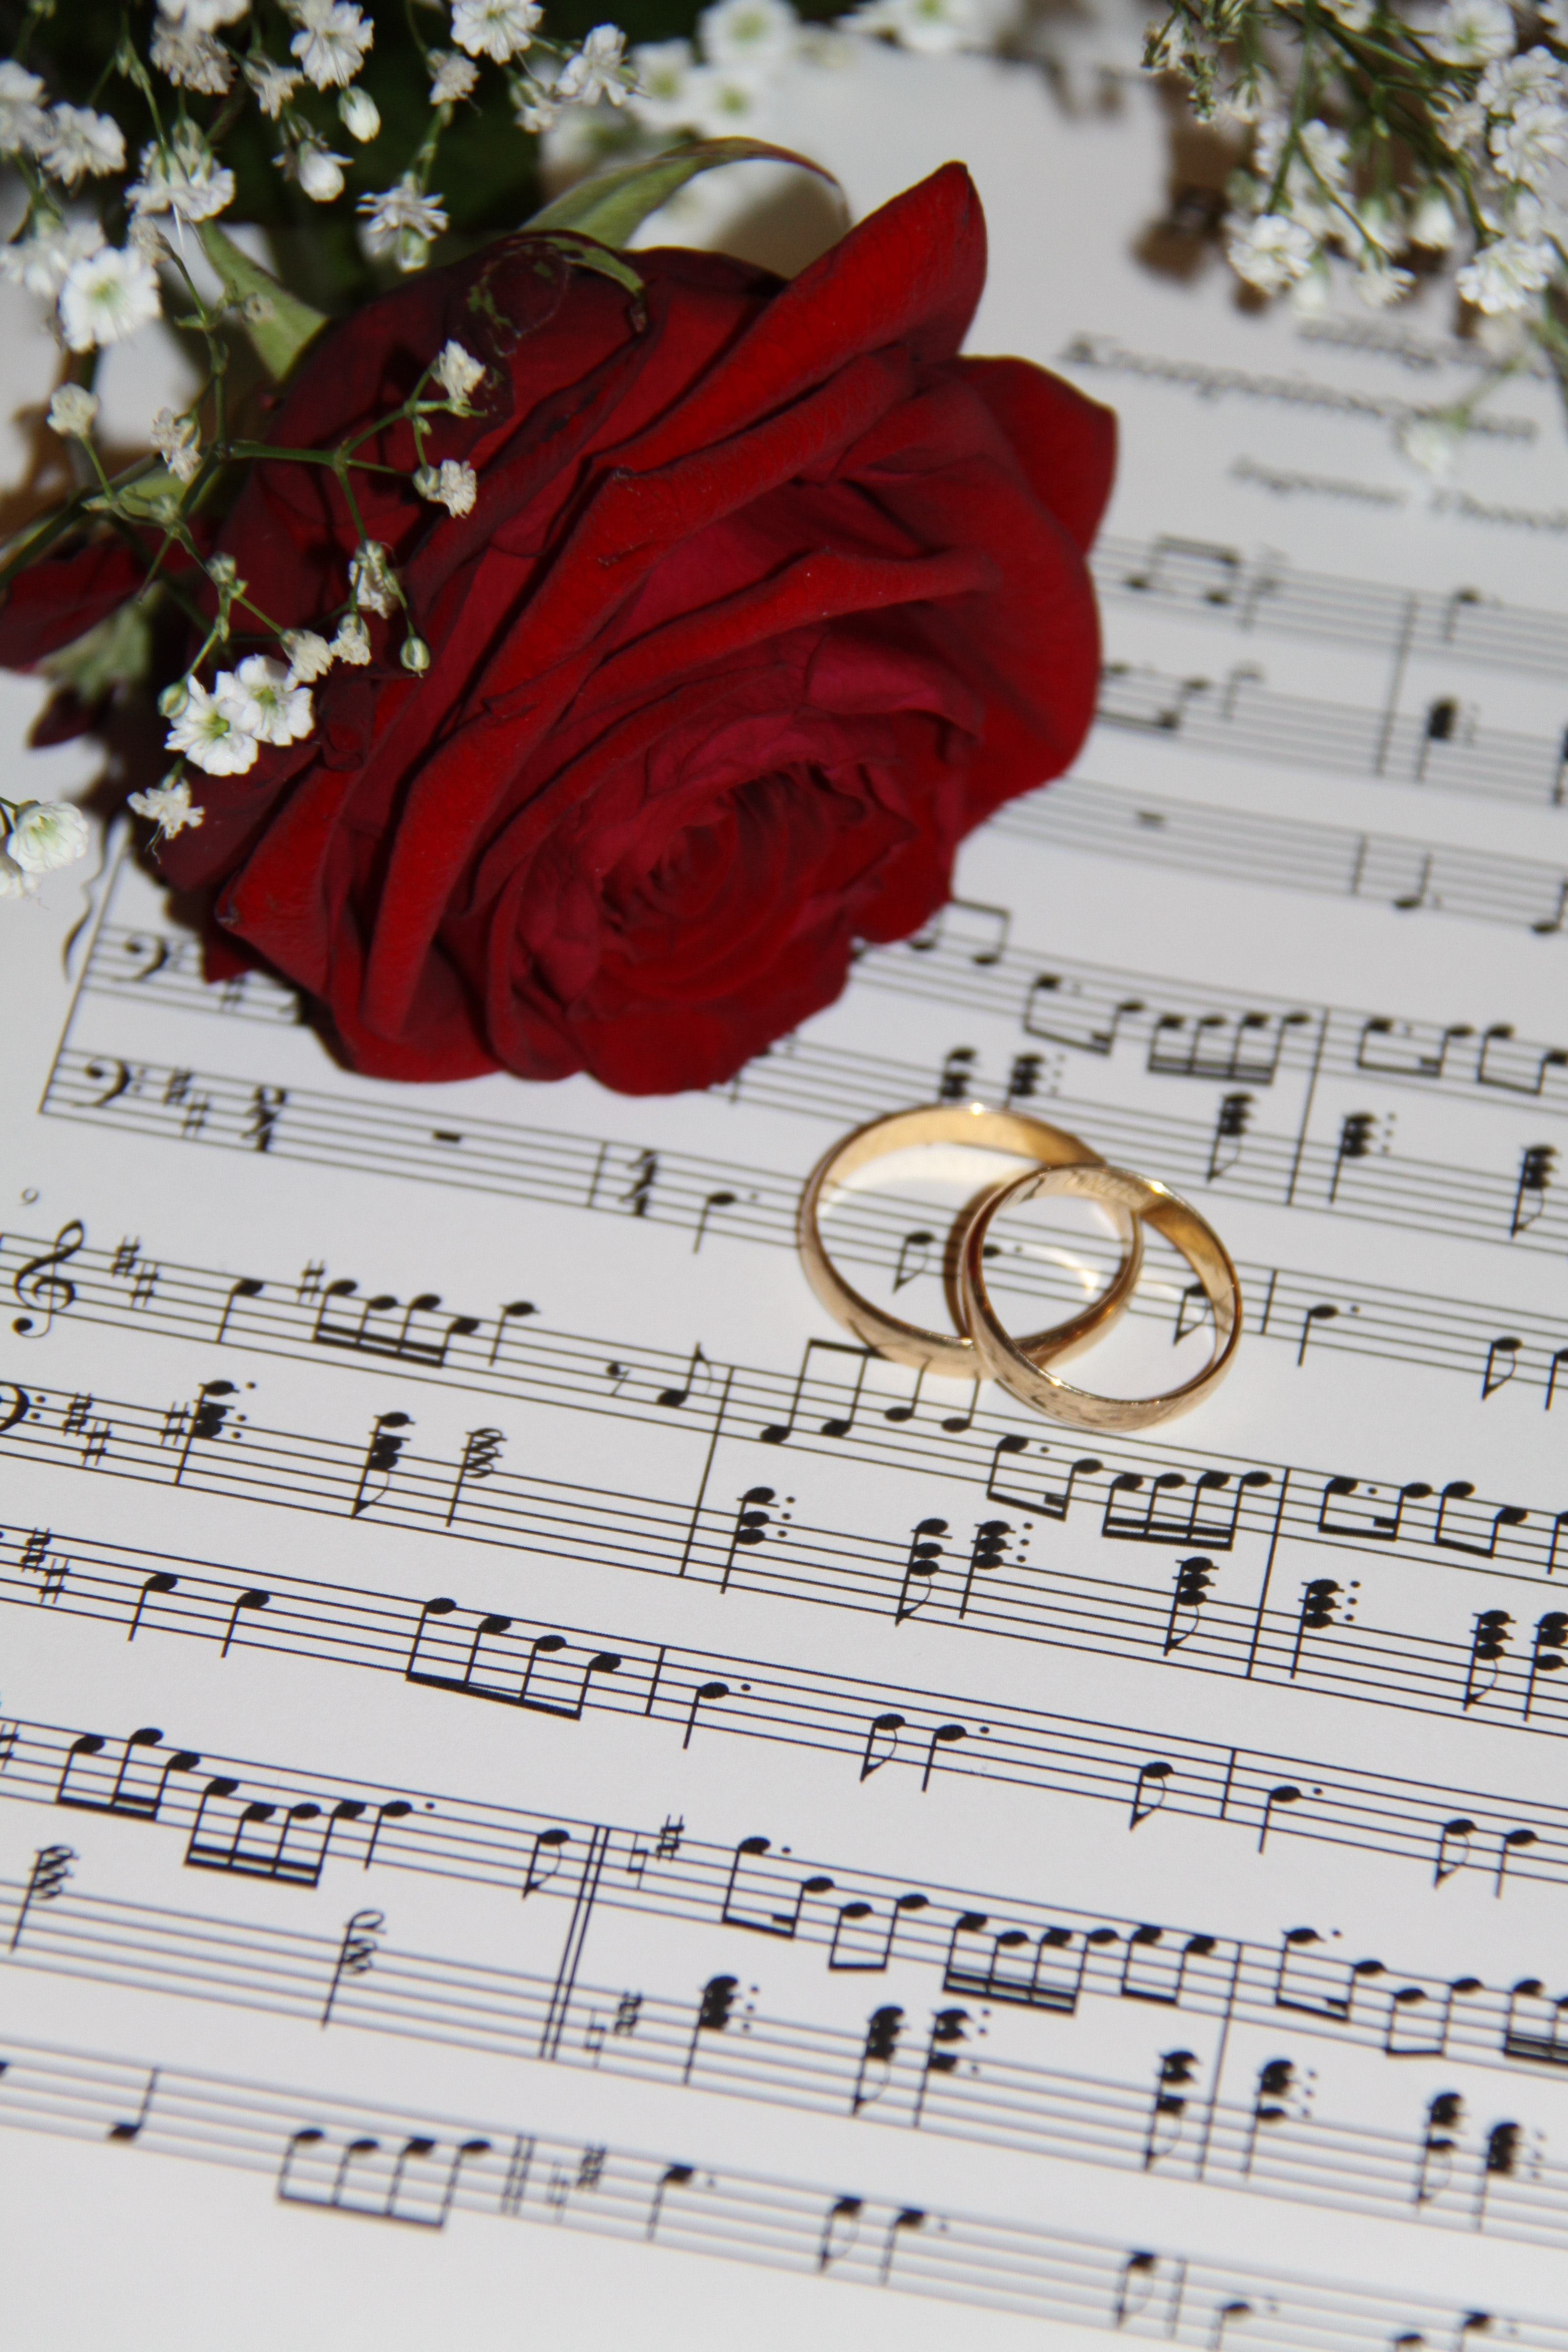 2 Gold Eternity Ring Near Red Rose on Musical Notes, Celebration, Flora, Flower, Love, HQ Photo